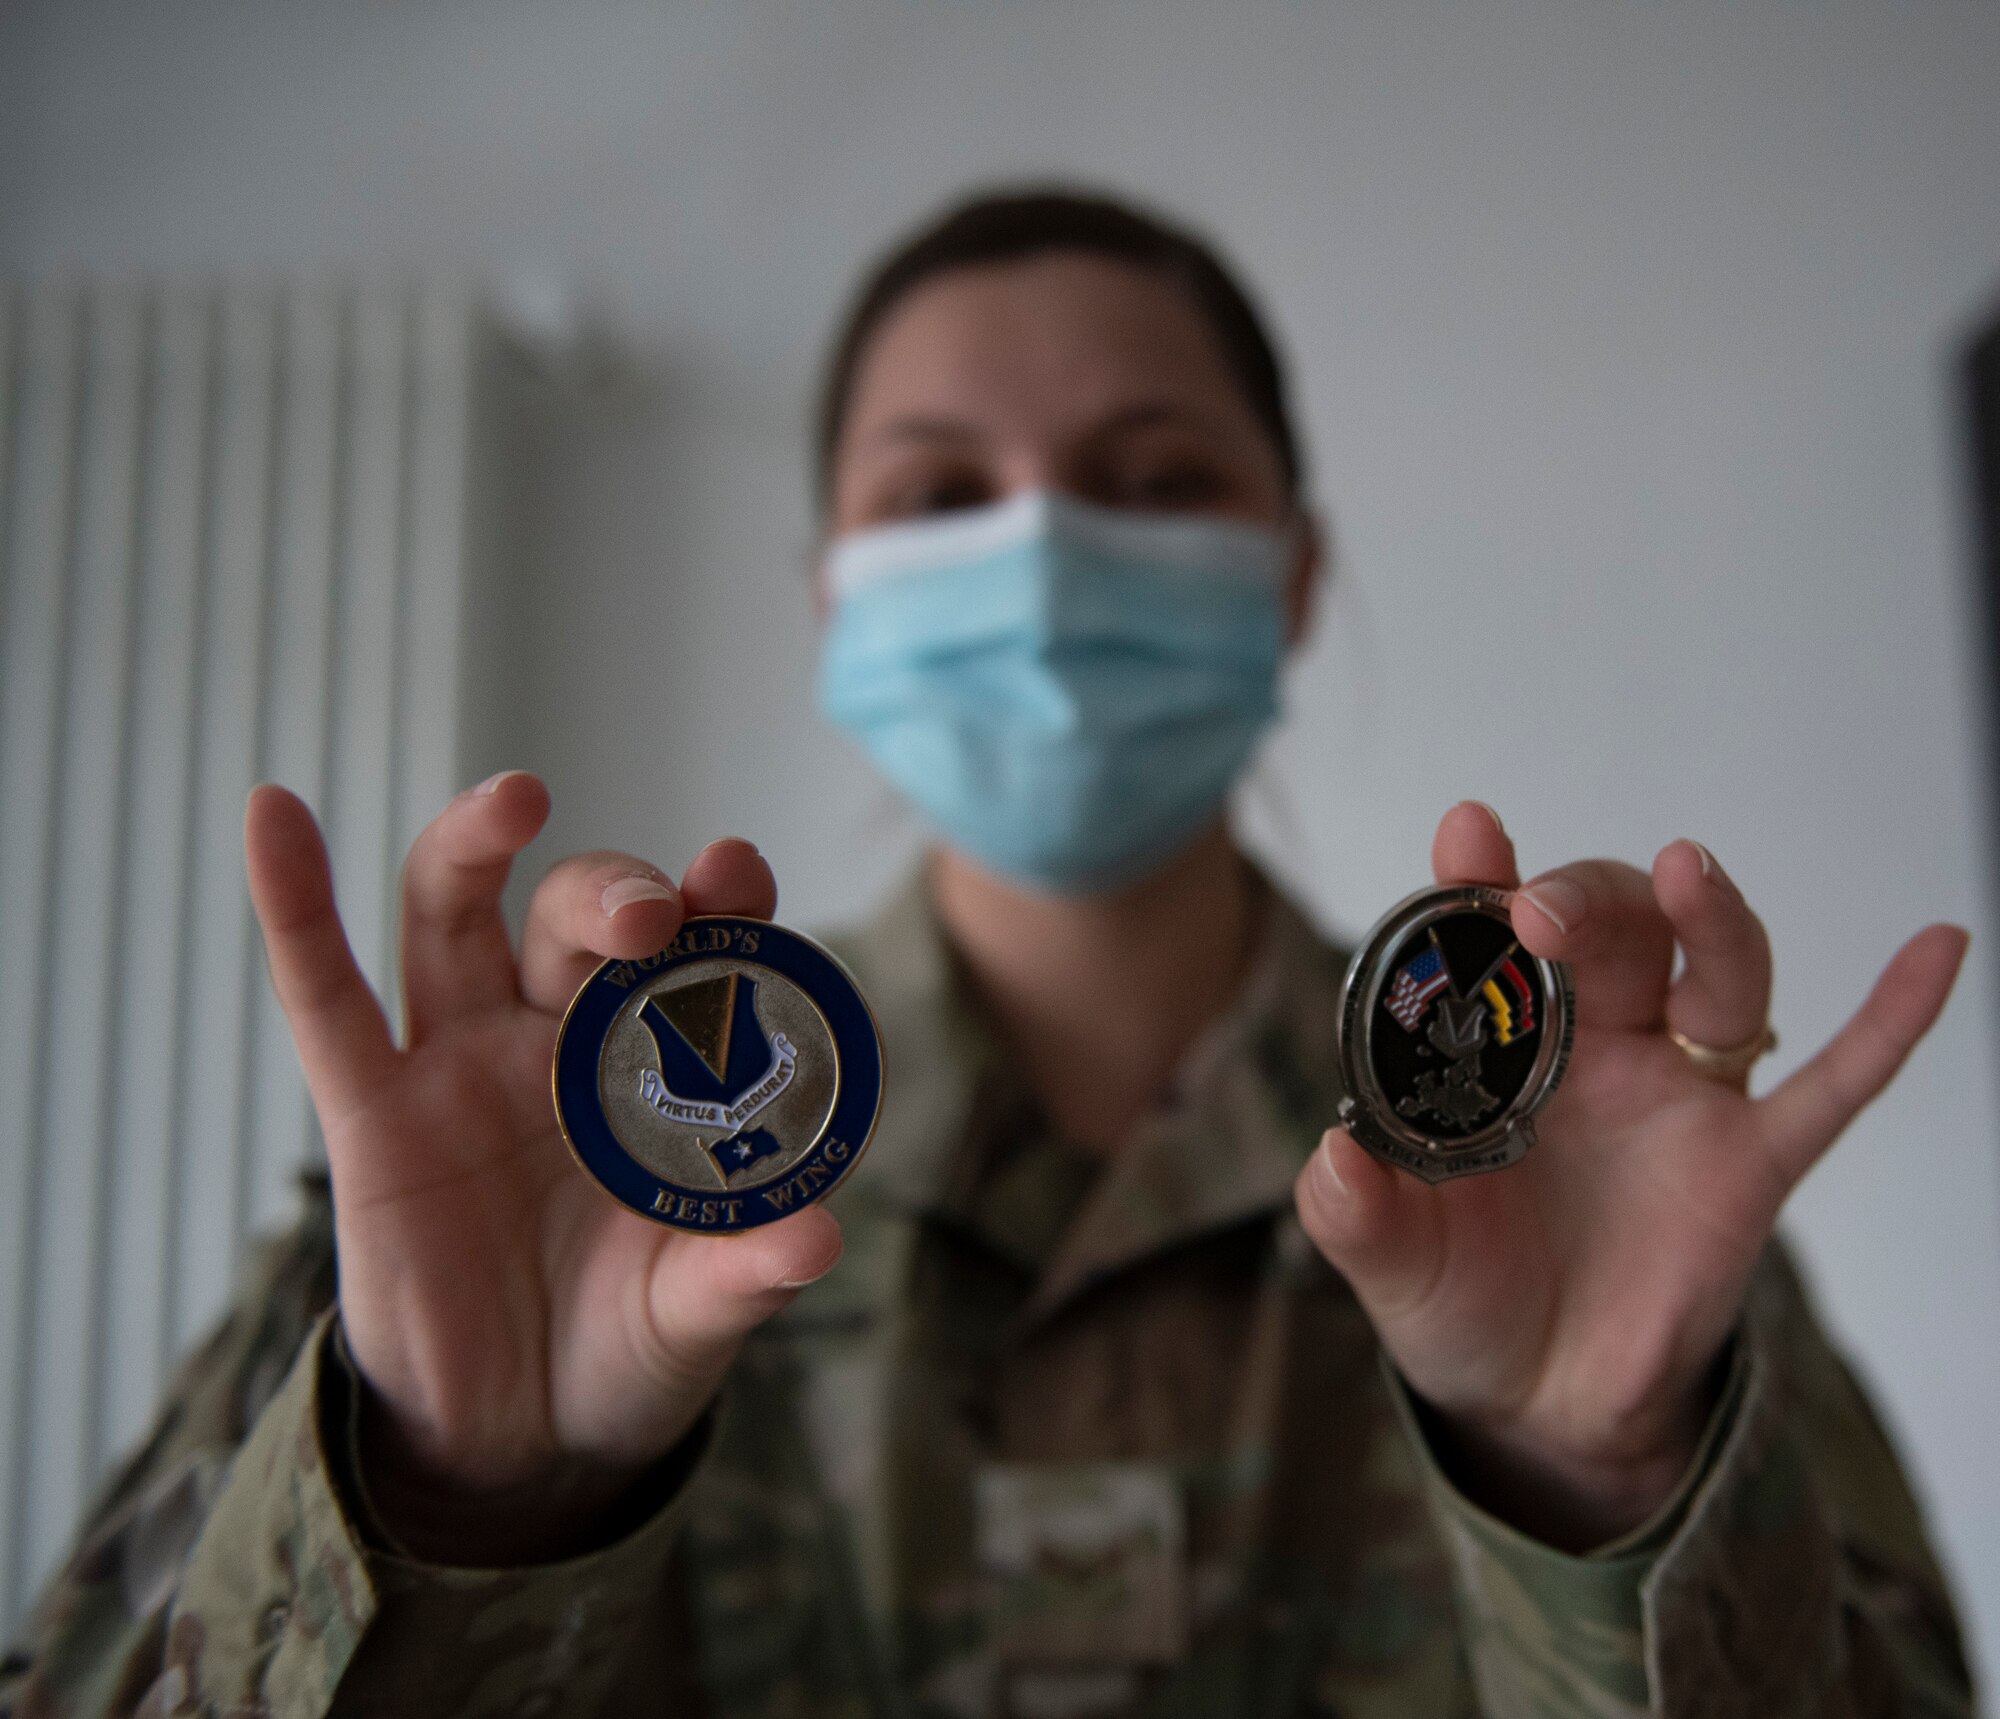 Female Airman shows off challenge coins.